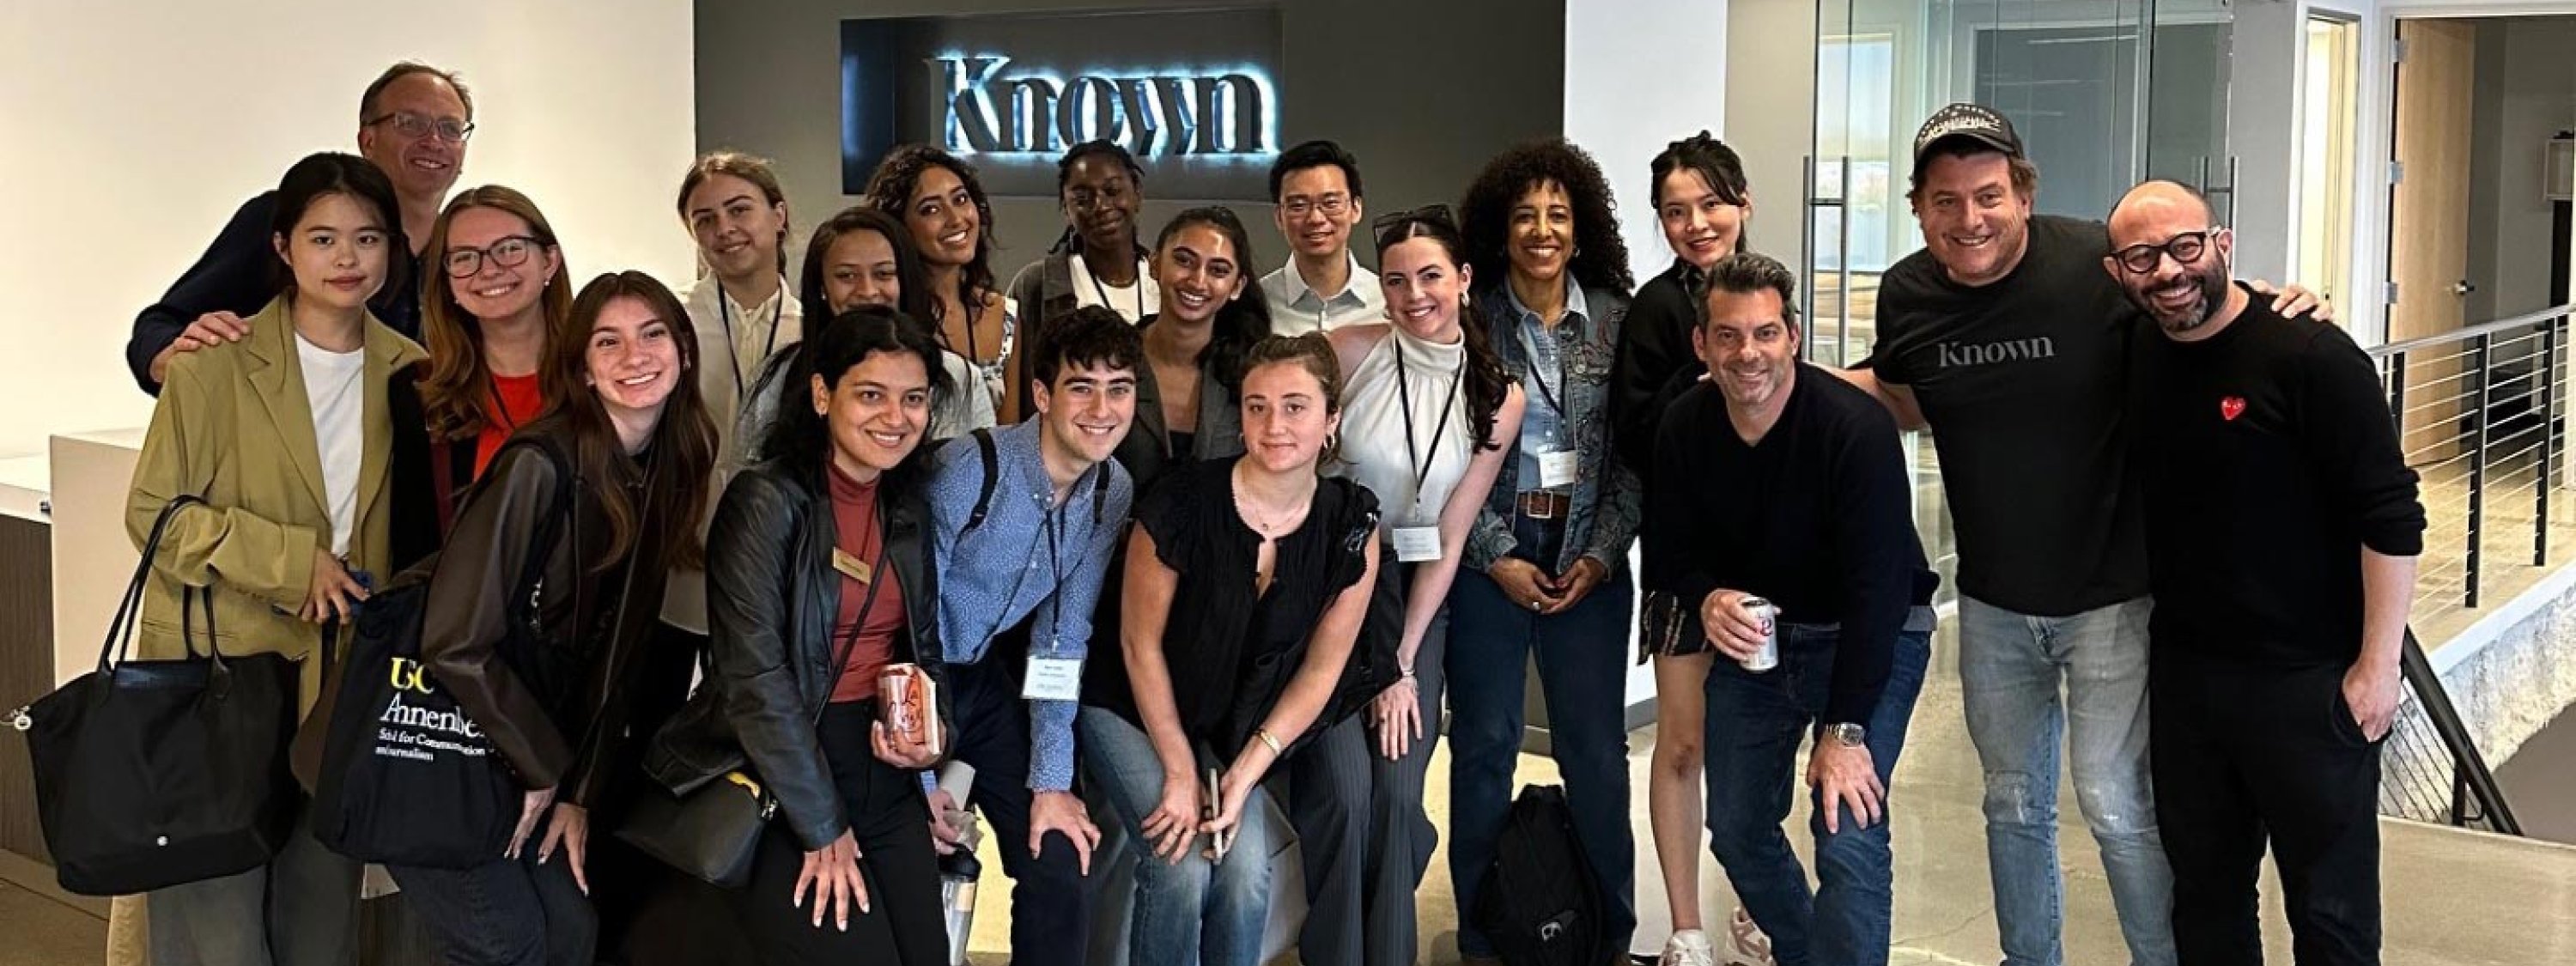 A group of students and faculty smile for a photo in front of a logo that says "Known."